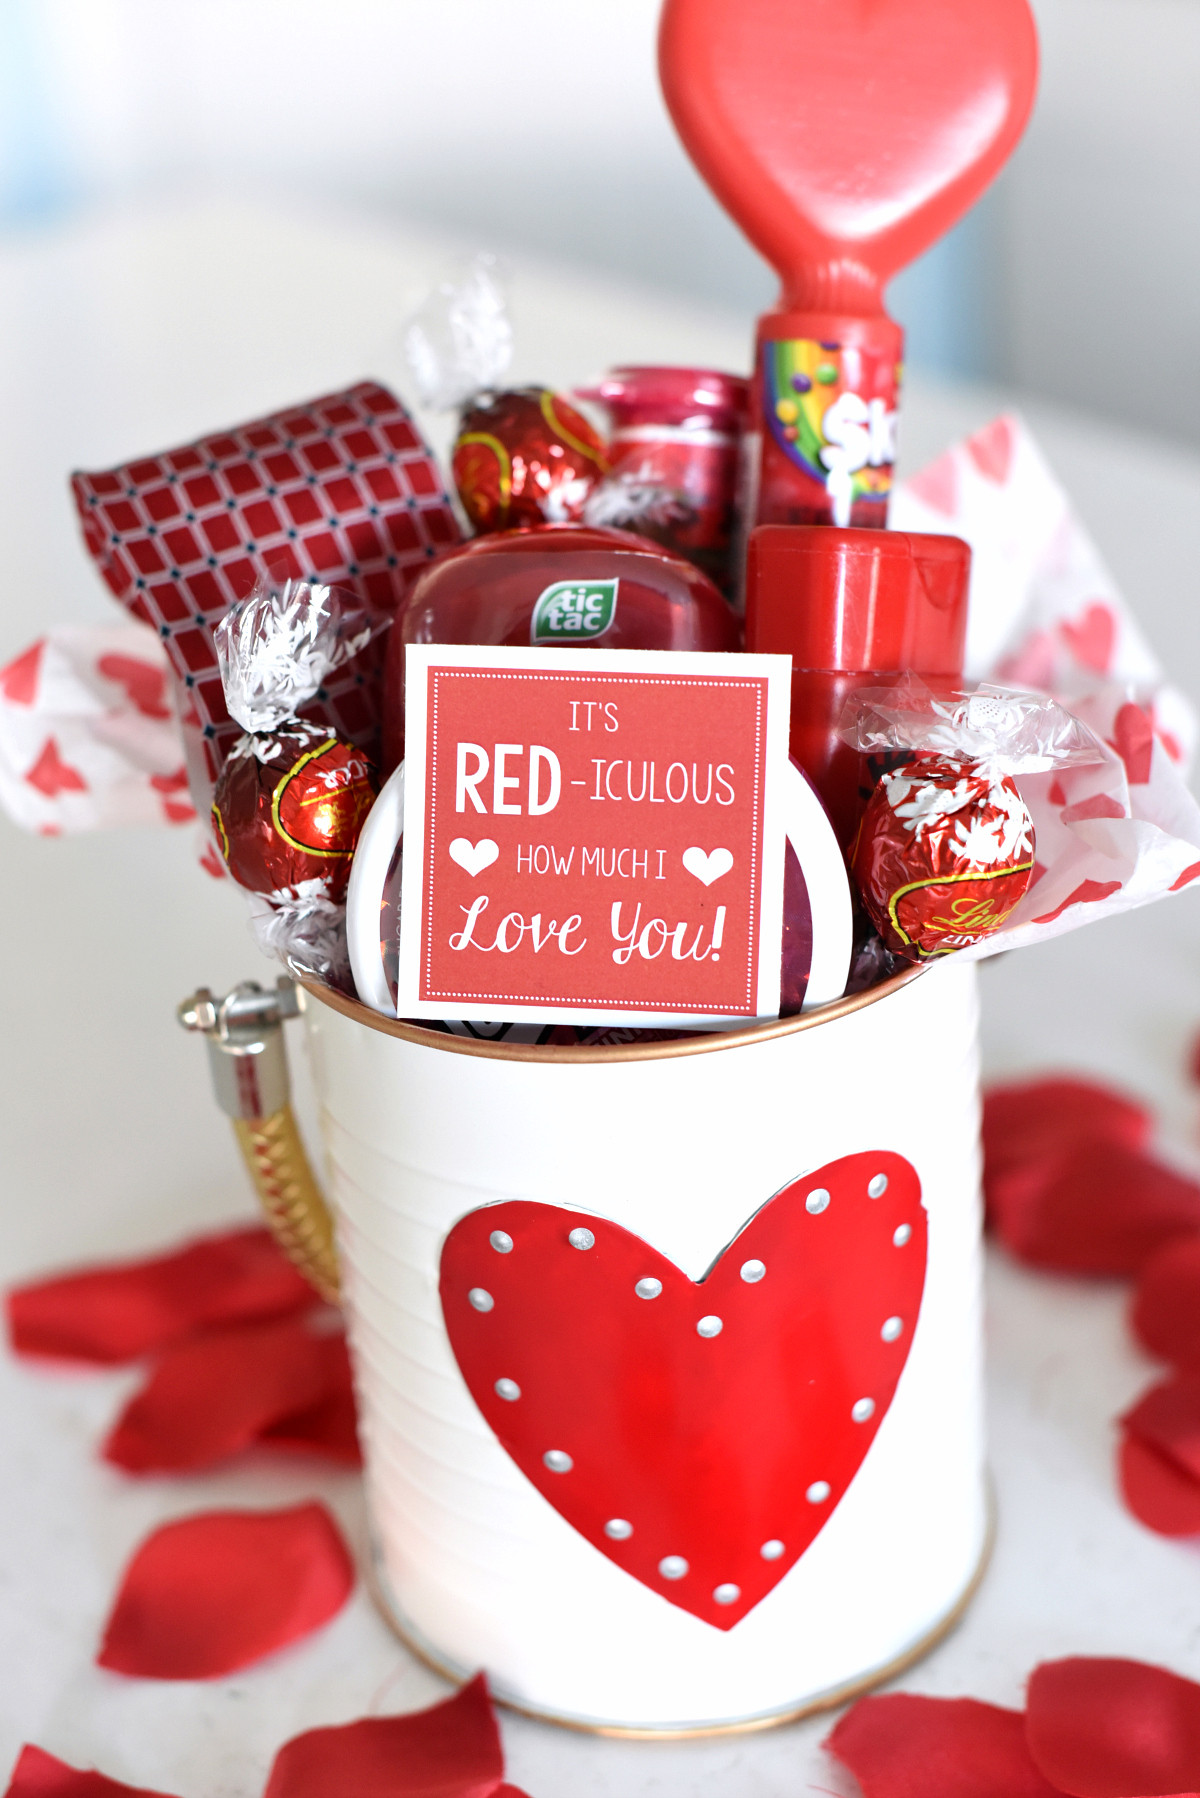 Valentines Gift Ideas For Husbands
 Cute Valentine s Day Gift Idea RED iculous Basket